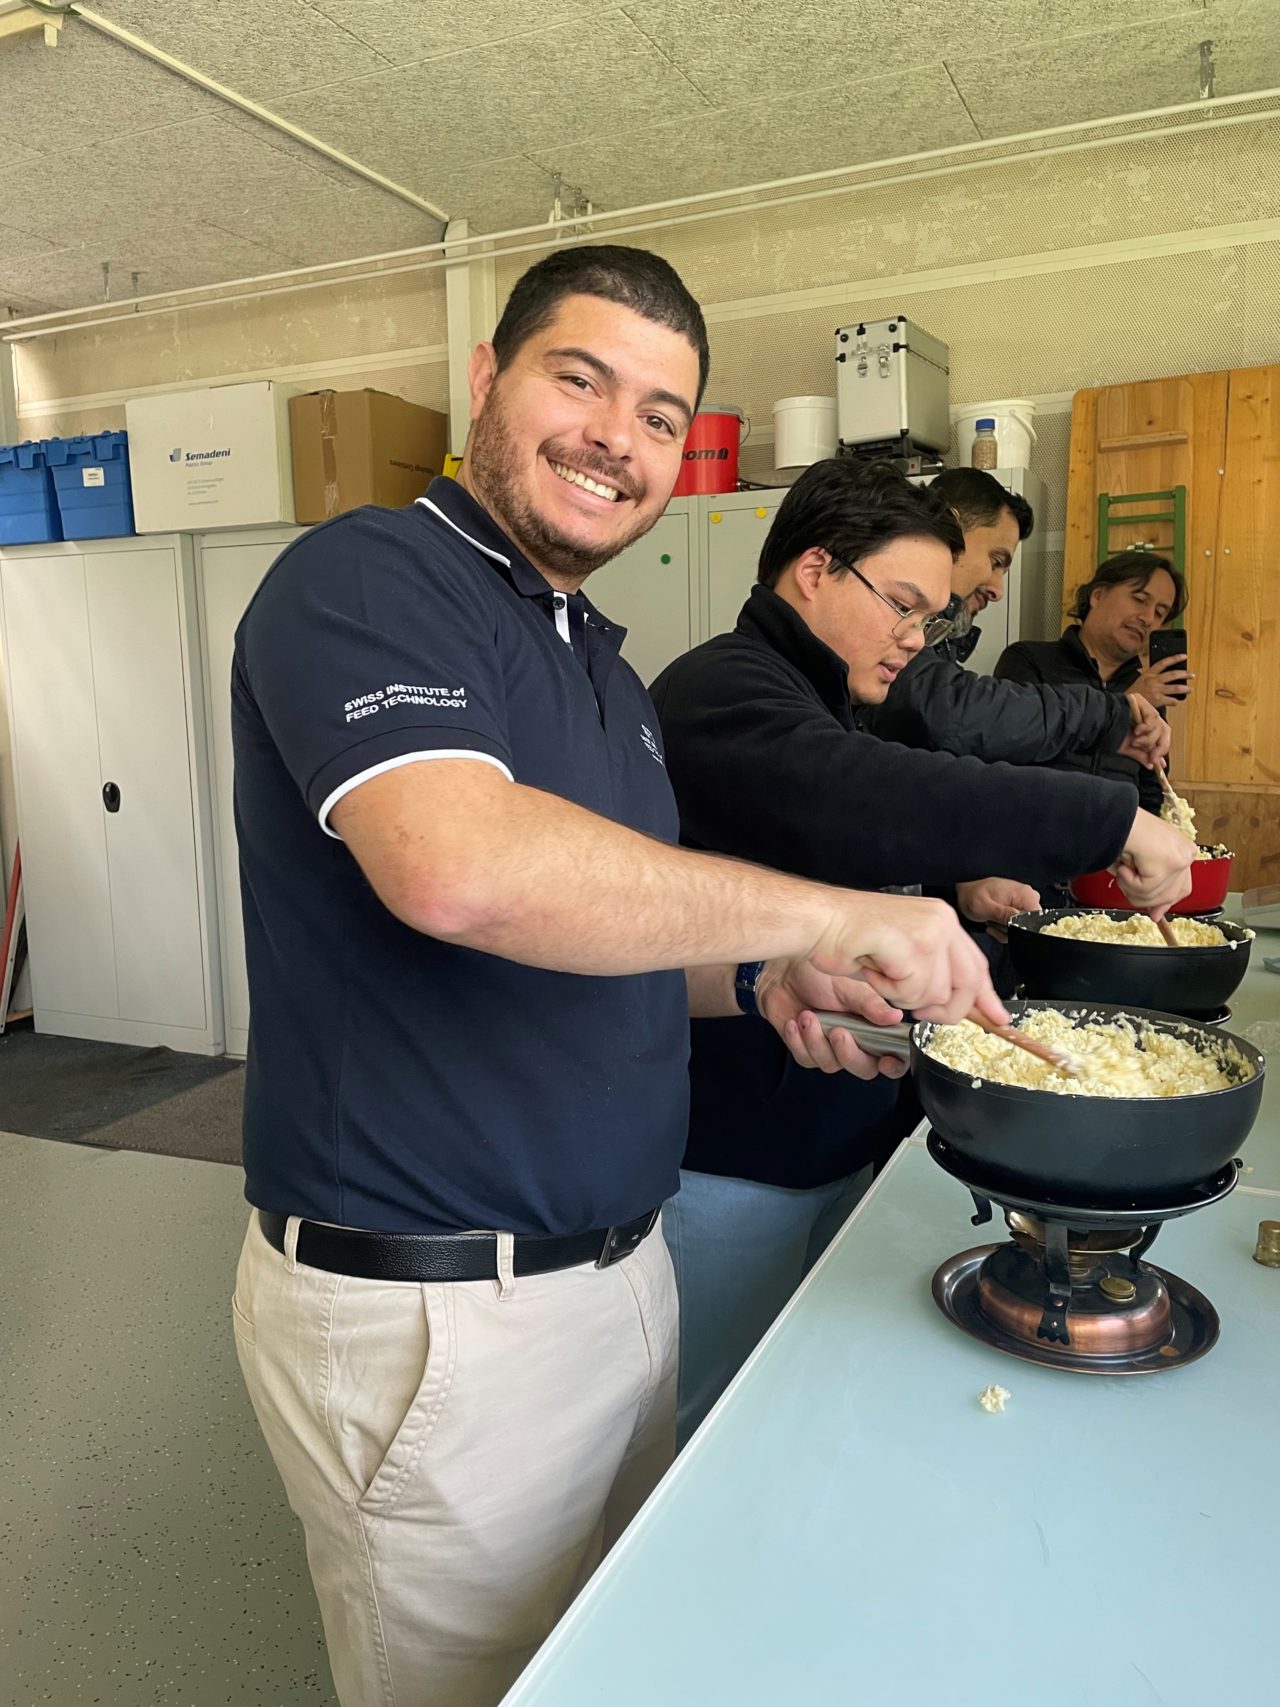 They made it, the first half of the diploma course ended on End of March with a typical Swiss cheese fondue. The course participants were allowed to swing the cooking spoon and review the exertions of the last 4 weeks.